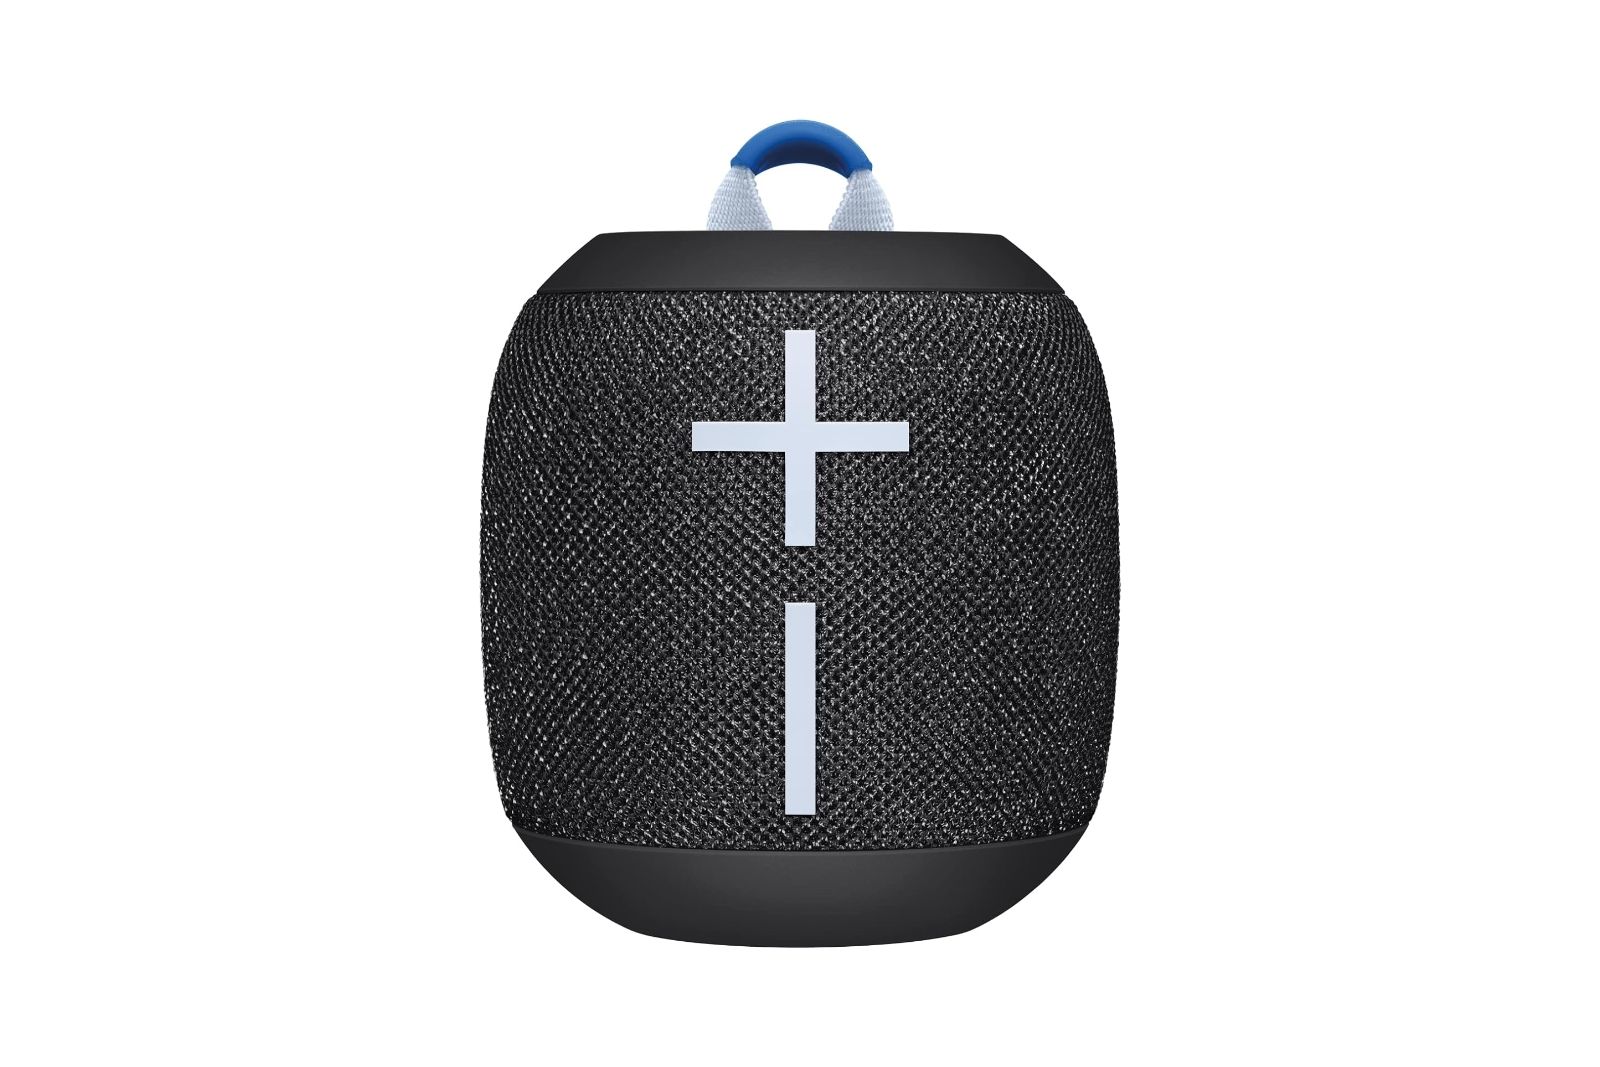 A black, gray, and blue Bluetooth speaker with giant volume controls on the side.